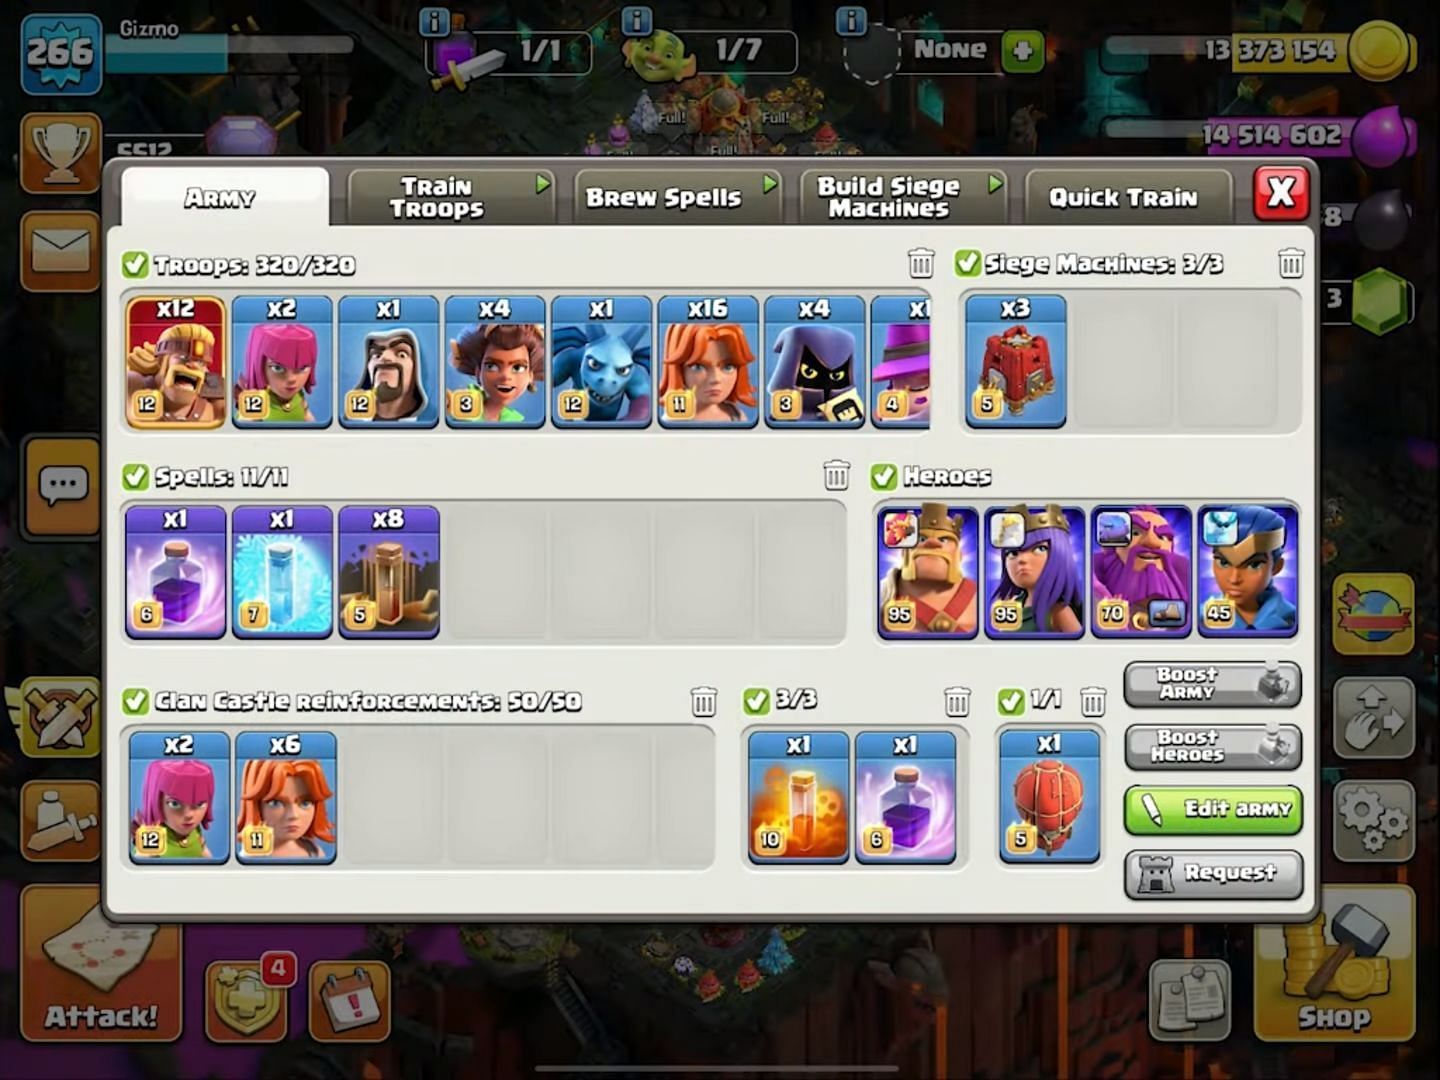 Army composition (Image via Supercell/ Mattgizmo YouTube)